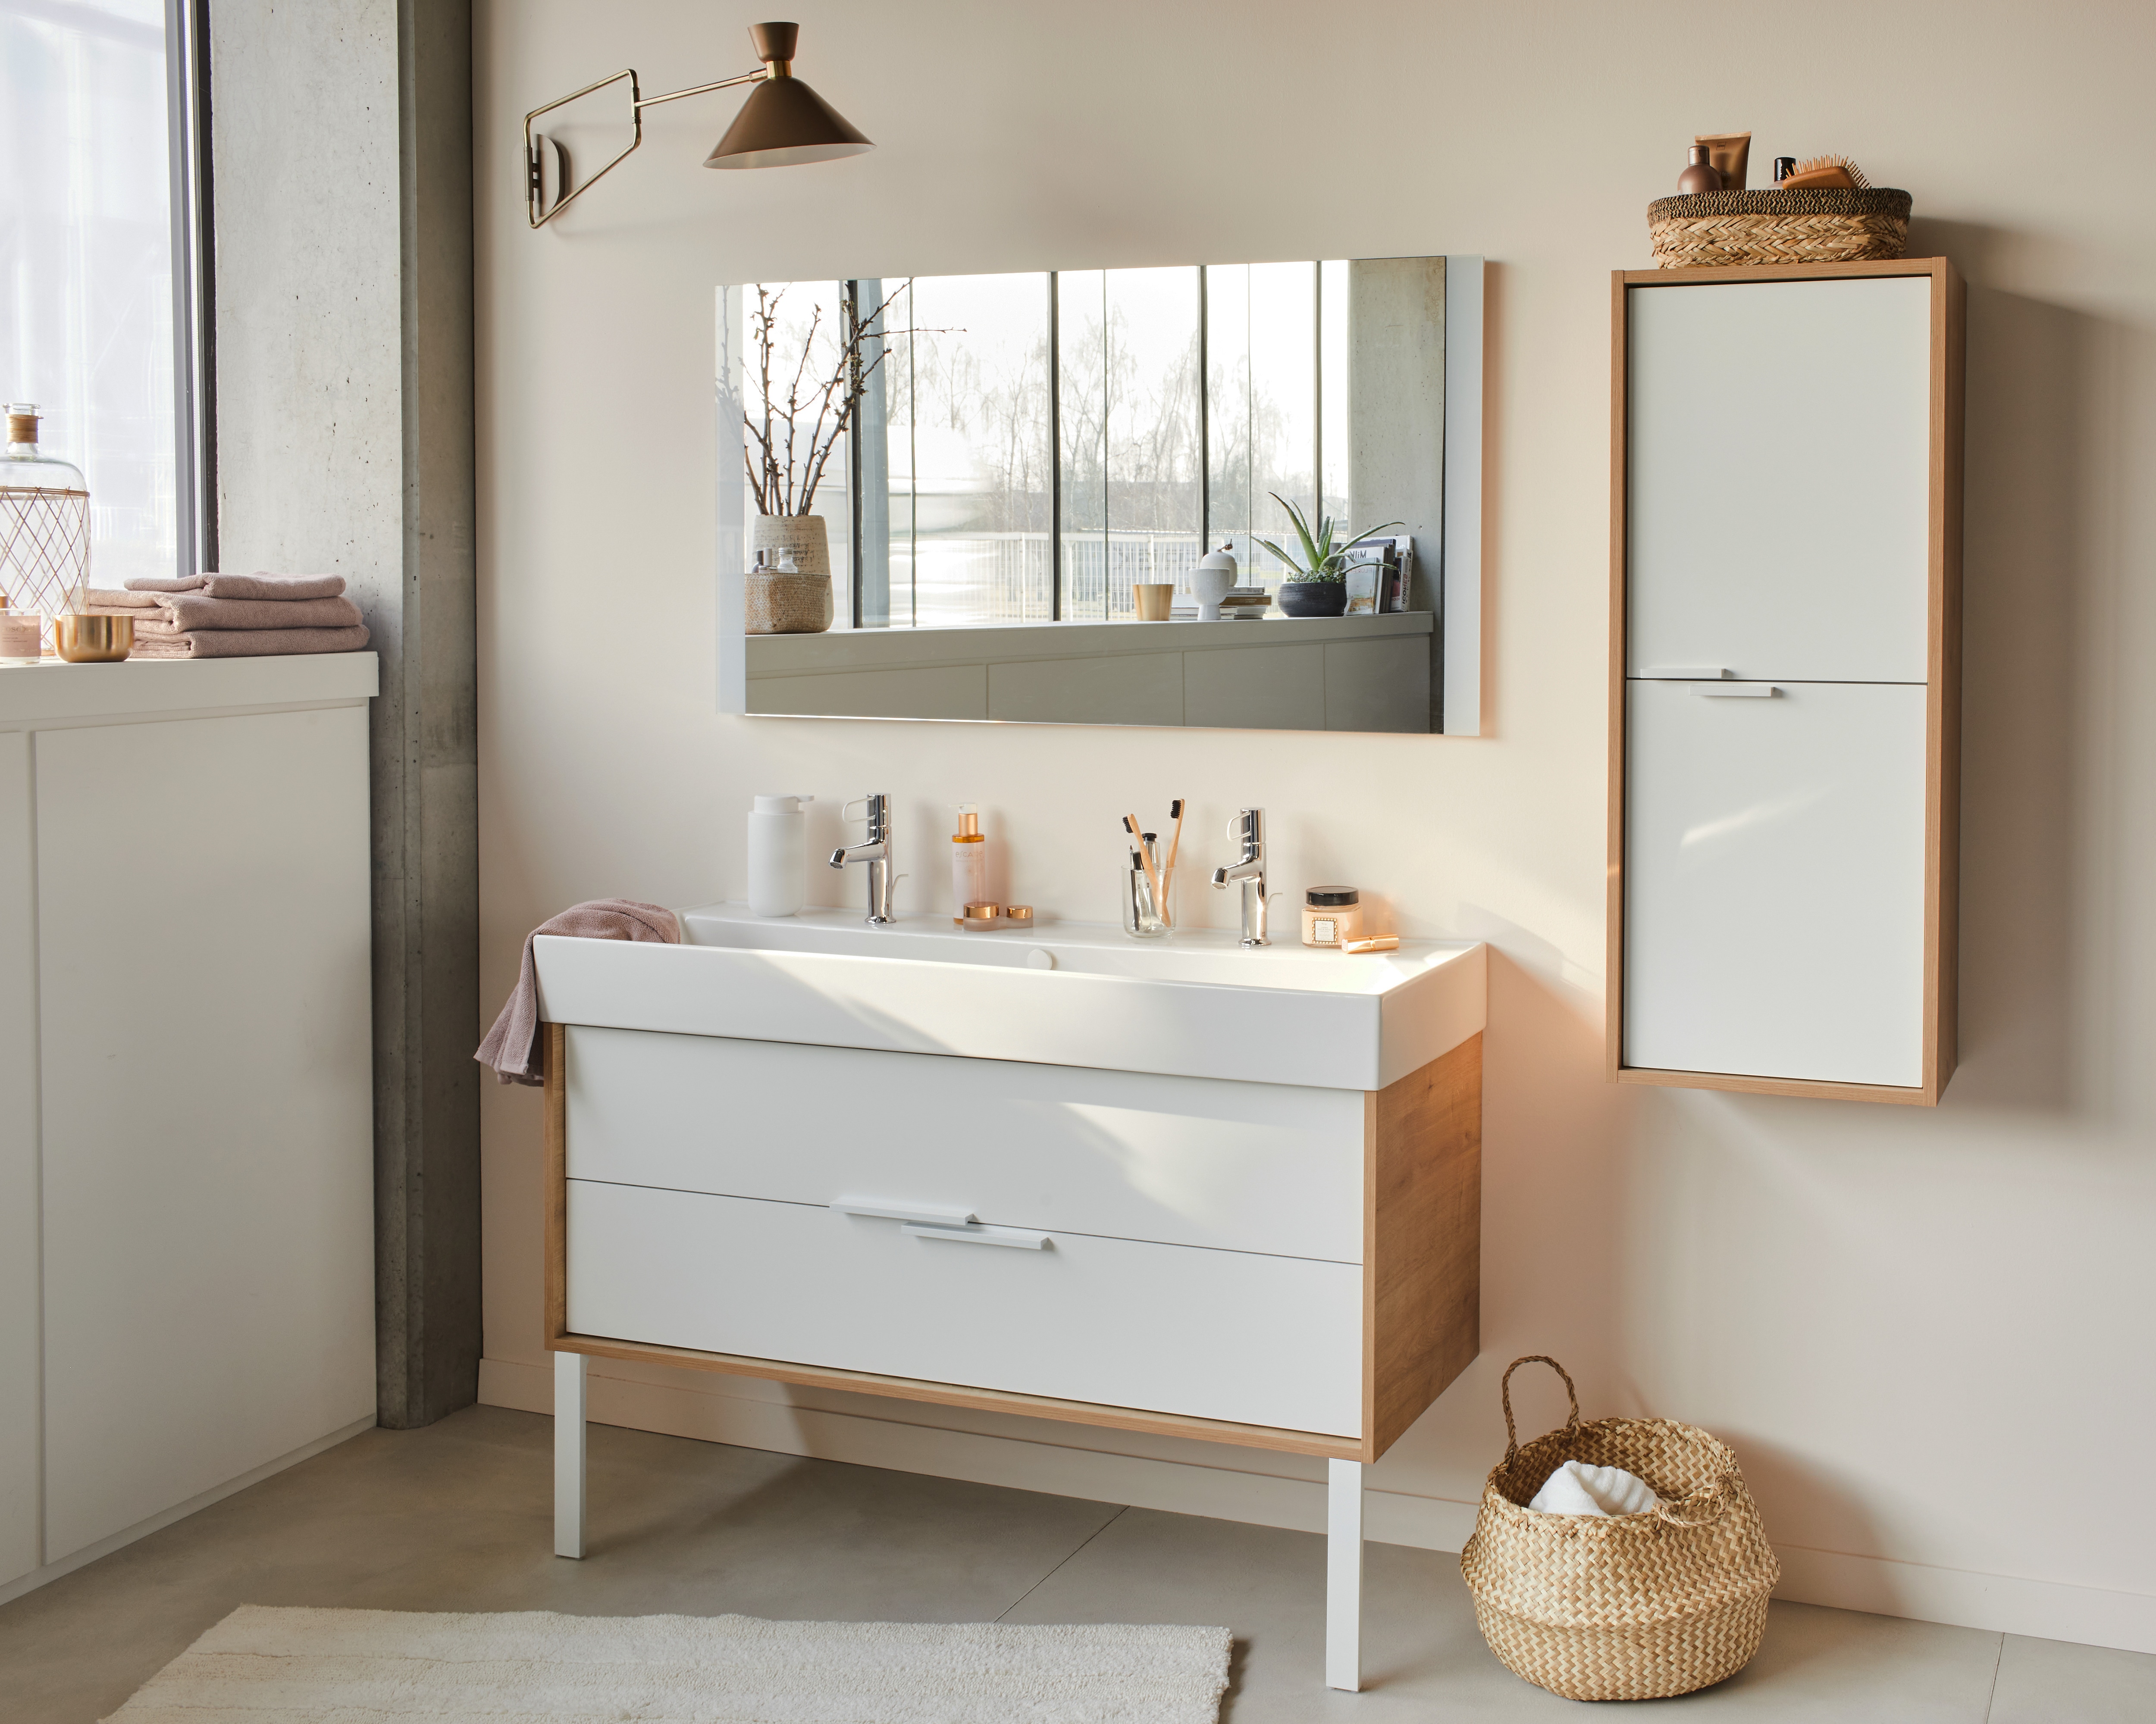 With Jacob Delafon, nothing is left to chance, whether it is the elegance  factor on our toilets, or the 10-year guarantee we commit to! Since  fixtures can be essential yet stylish, discover